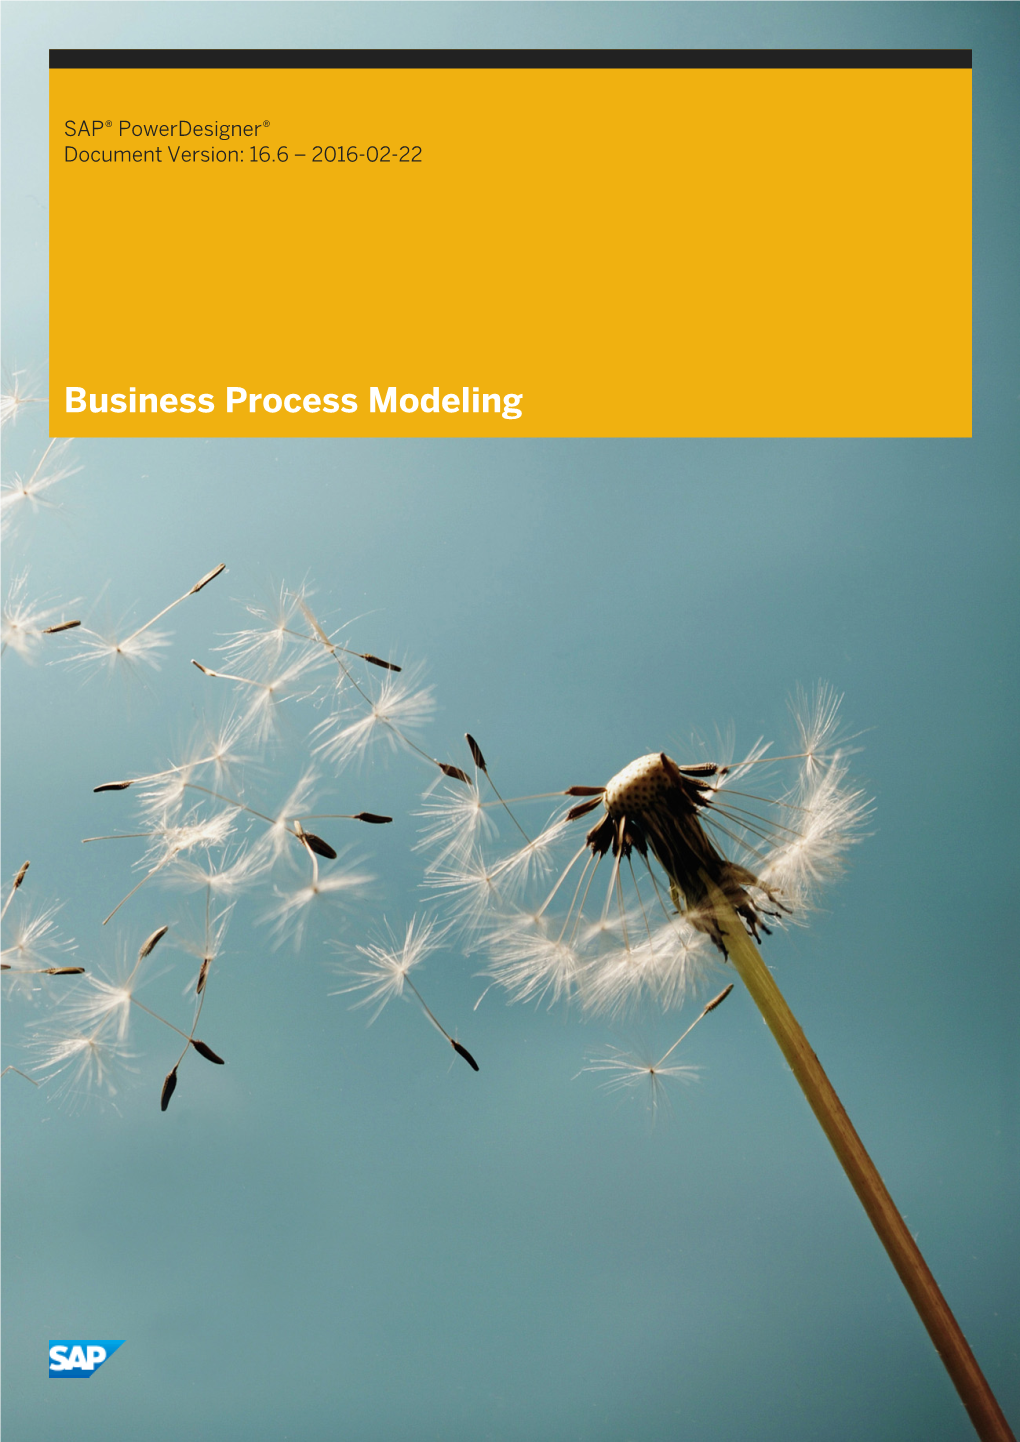 Business Process Modeling Content